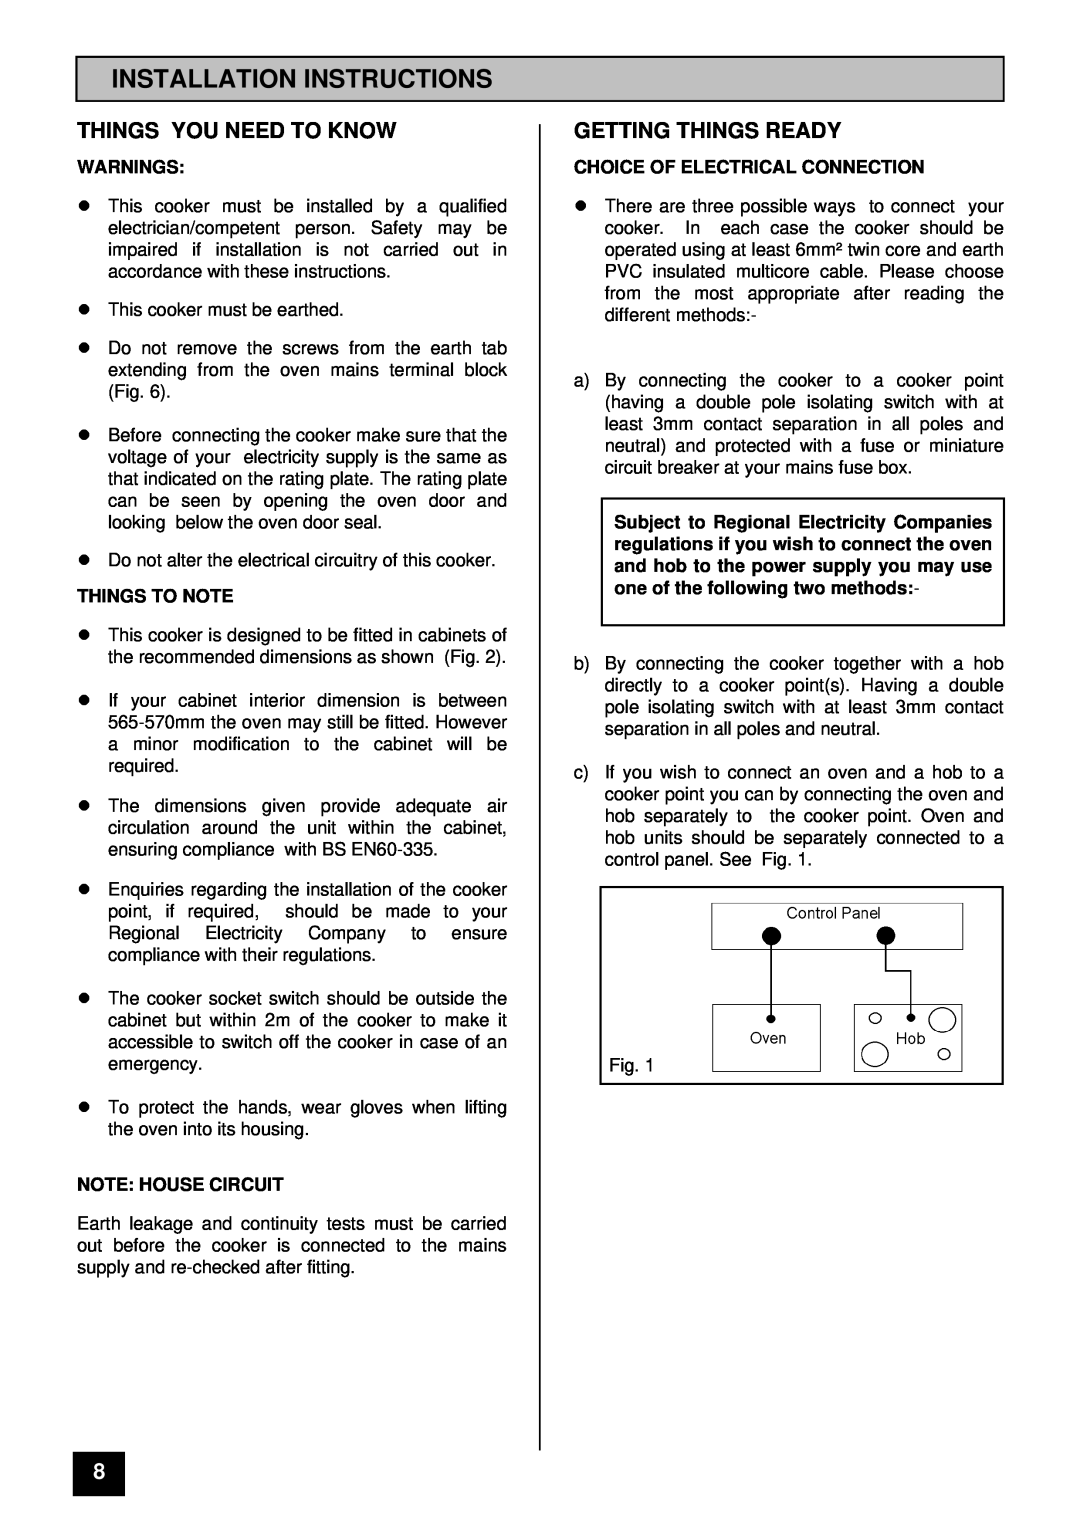 Tricity Bendix BD900 Installation Instructions, Things You Need To Know, Getting Things Ready, Warnings, Things To Note 